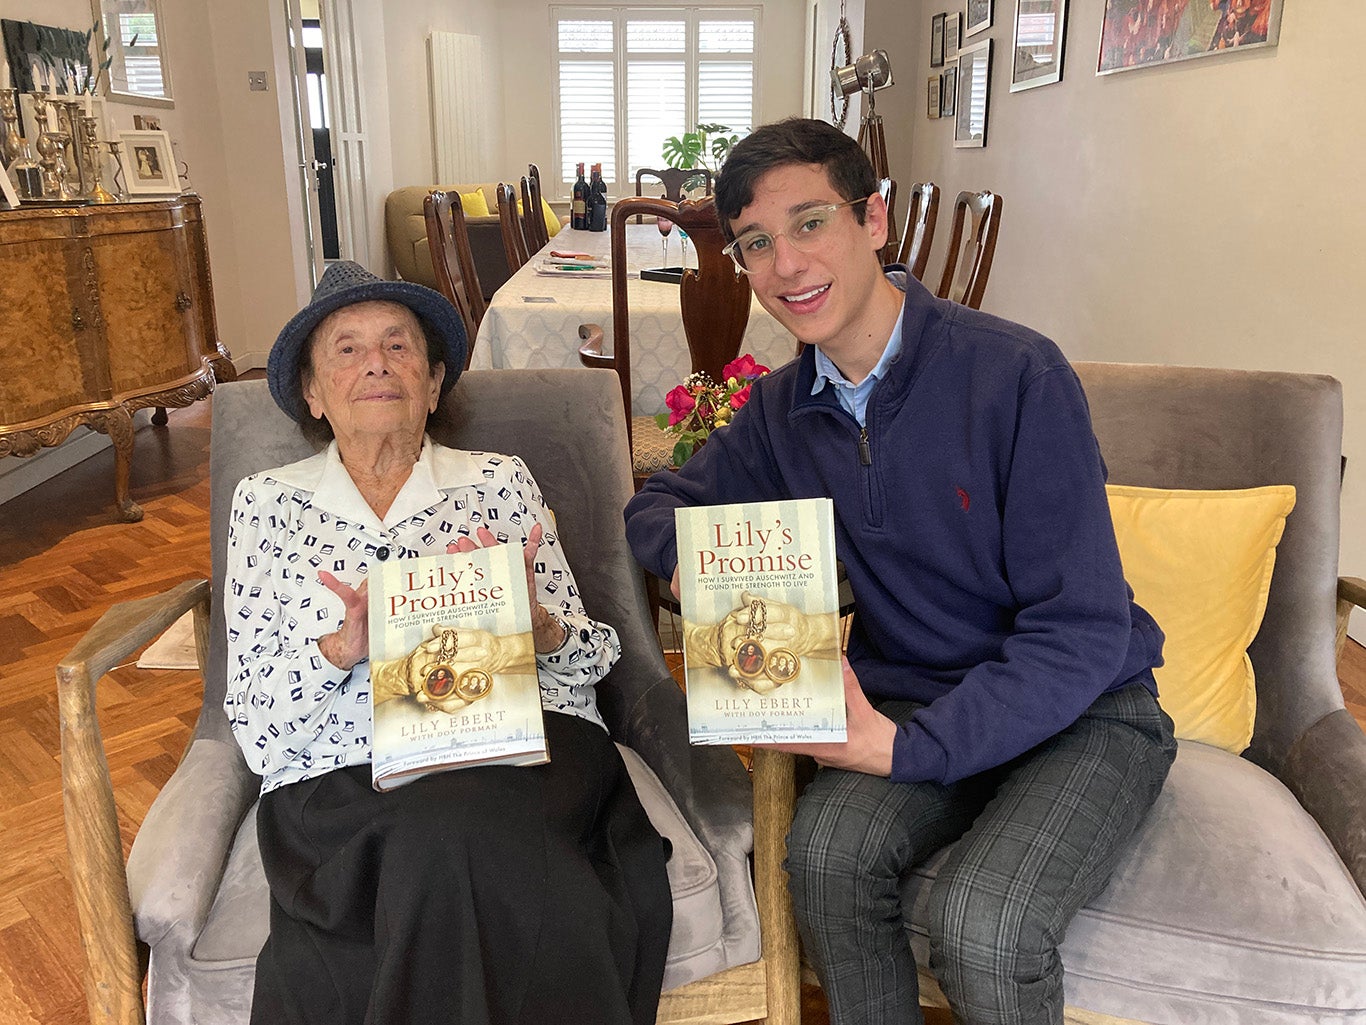 Dov Forman sits beside his great-grandmother Lily Ebert, each holding a copy of their book Lily's Promise